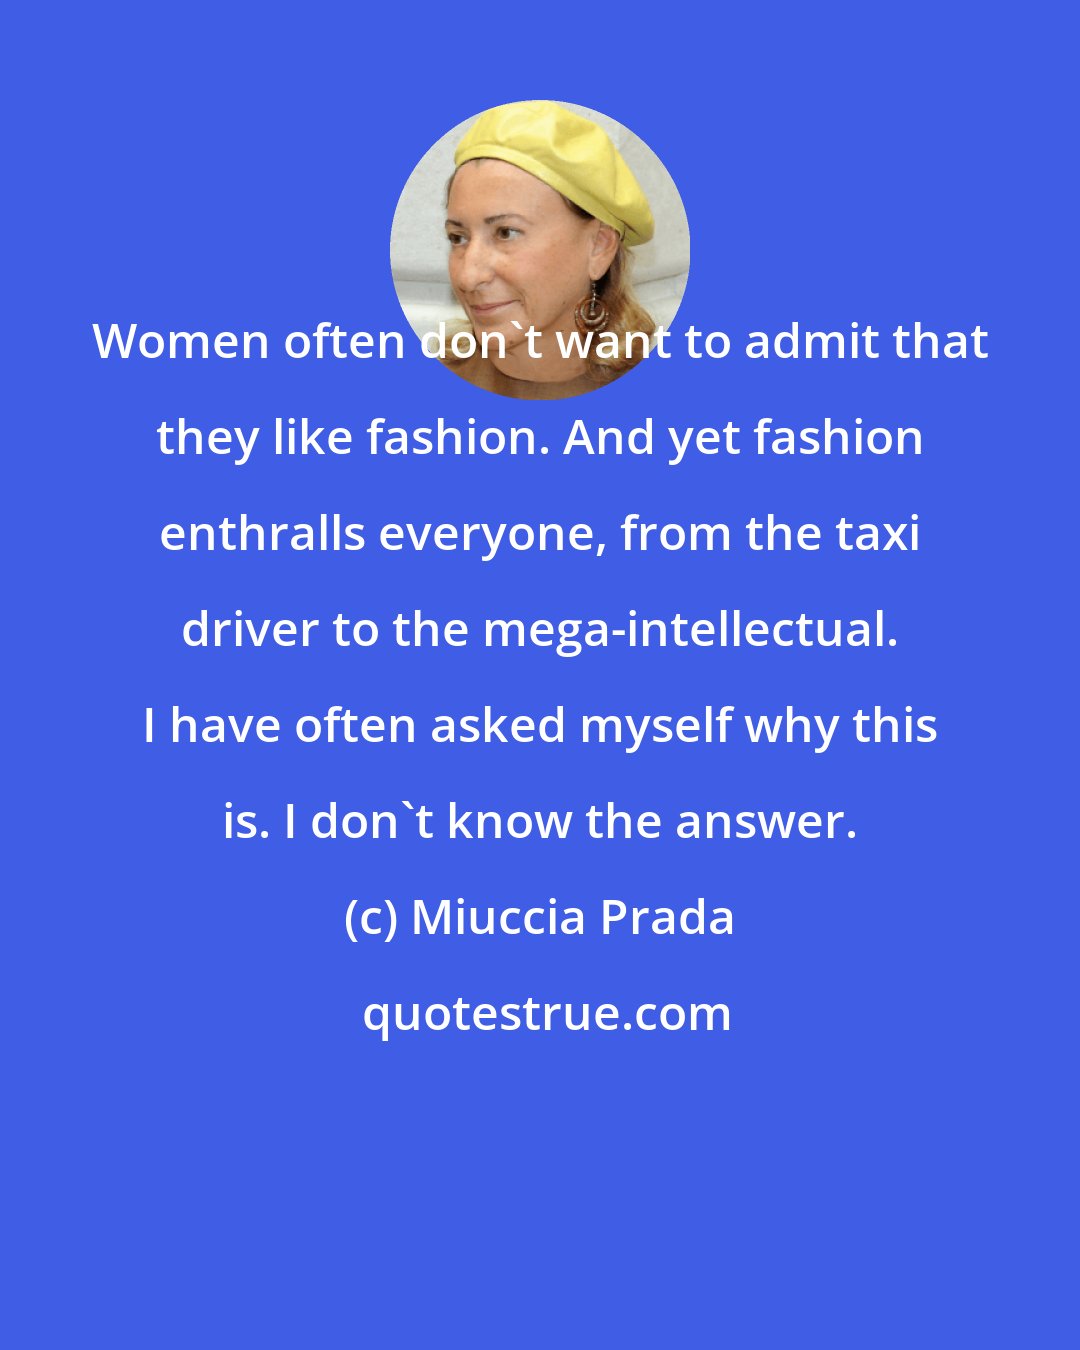 Miuccia Prada: Women often don't want to admit that they like fashion. And yet fashion enthralls everyone, from the taxi driver to the mega-intellectual. I have often asked myself why this is. I don't know the answer.